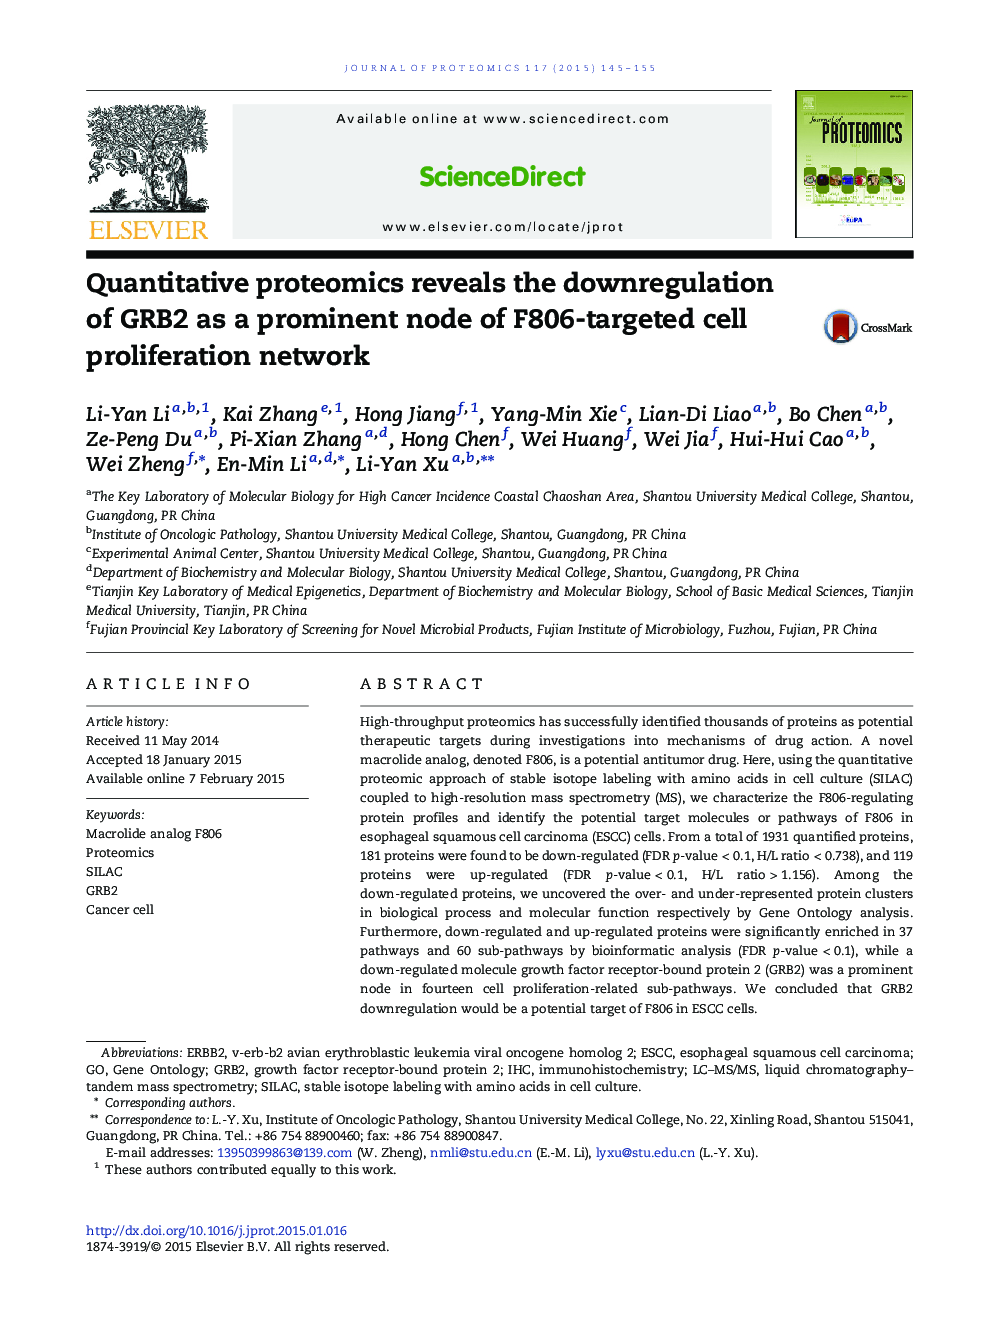 Quantitative proteomics reveals the downregulation of GRB2 as a prominent node of F806-targeted cell proliferation network